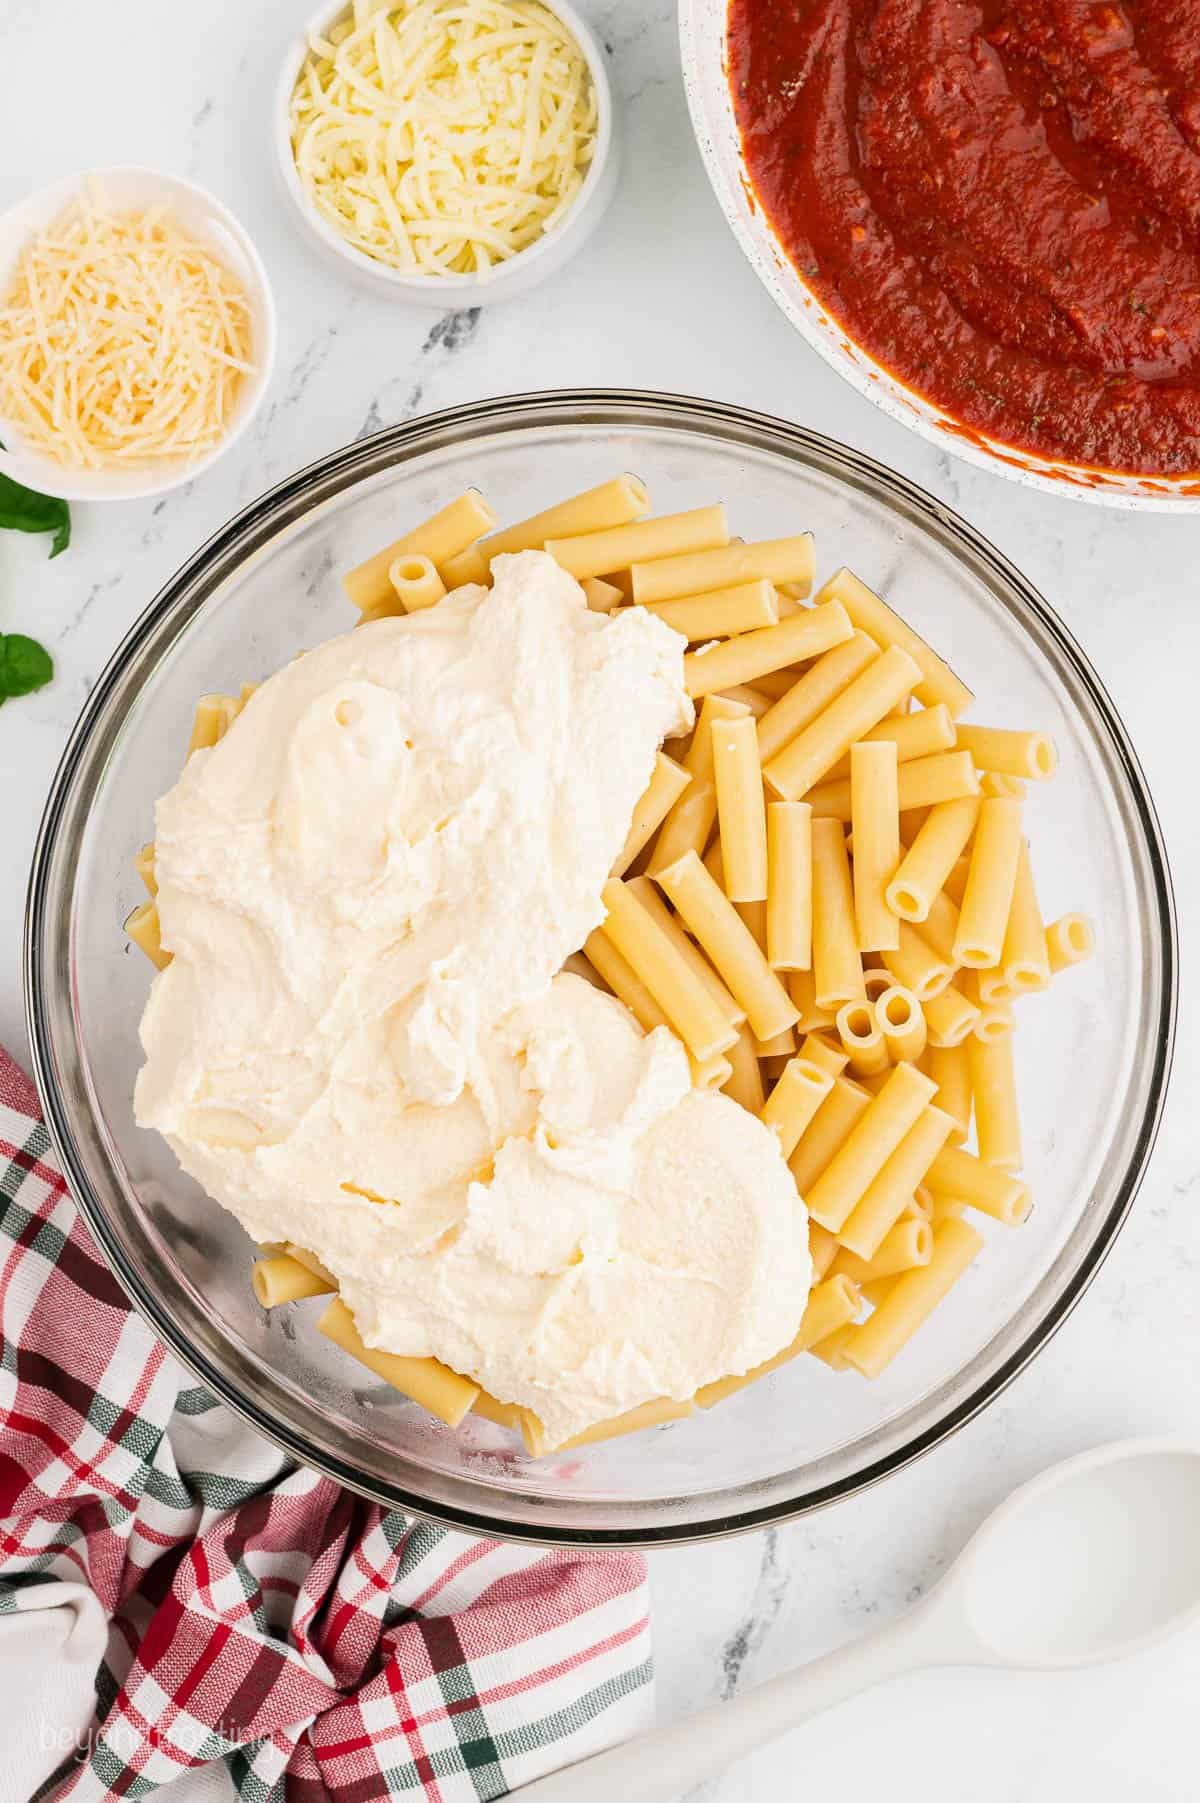 Ziti noodles with ricotta cheese in a bowl